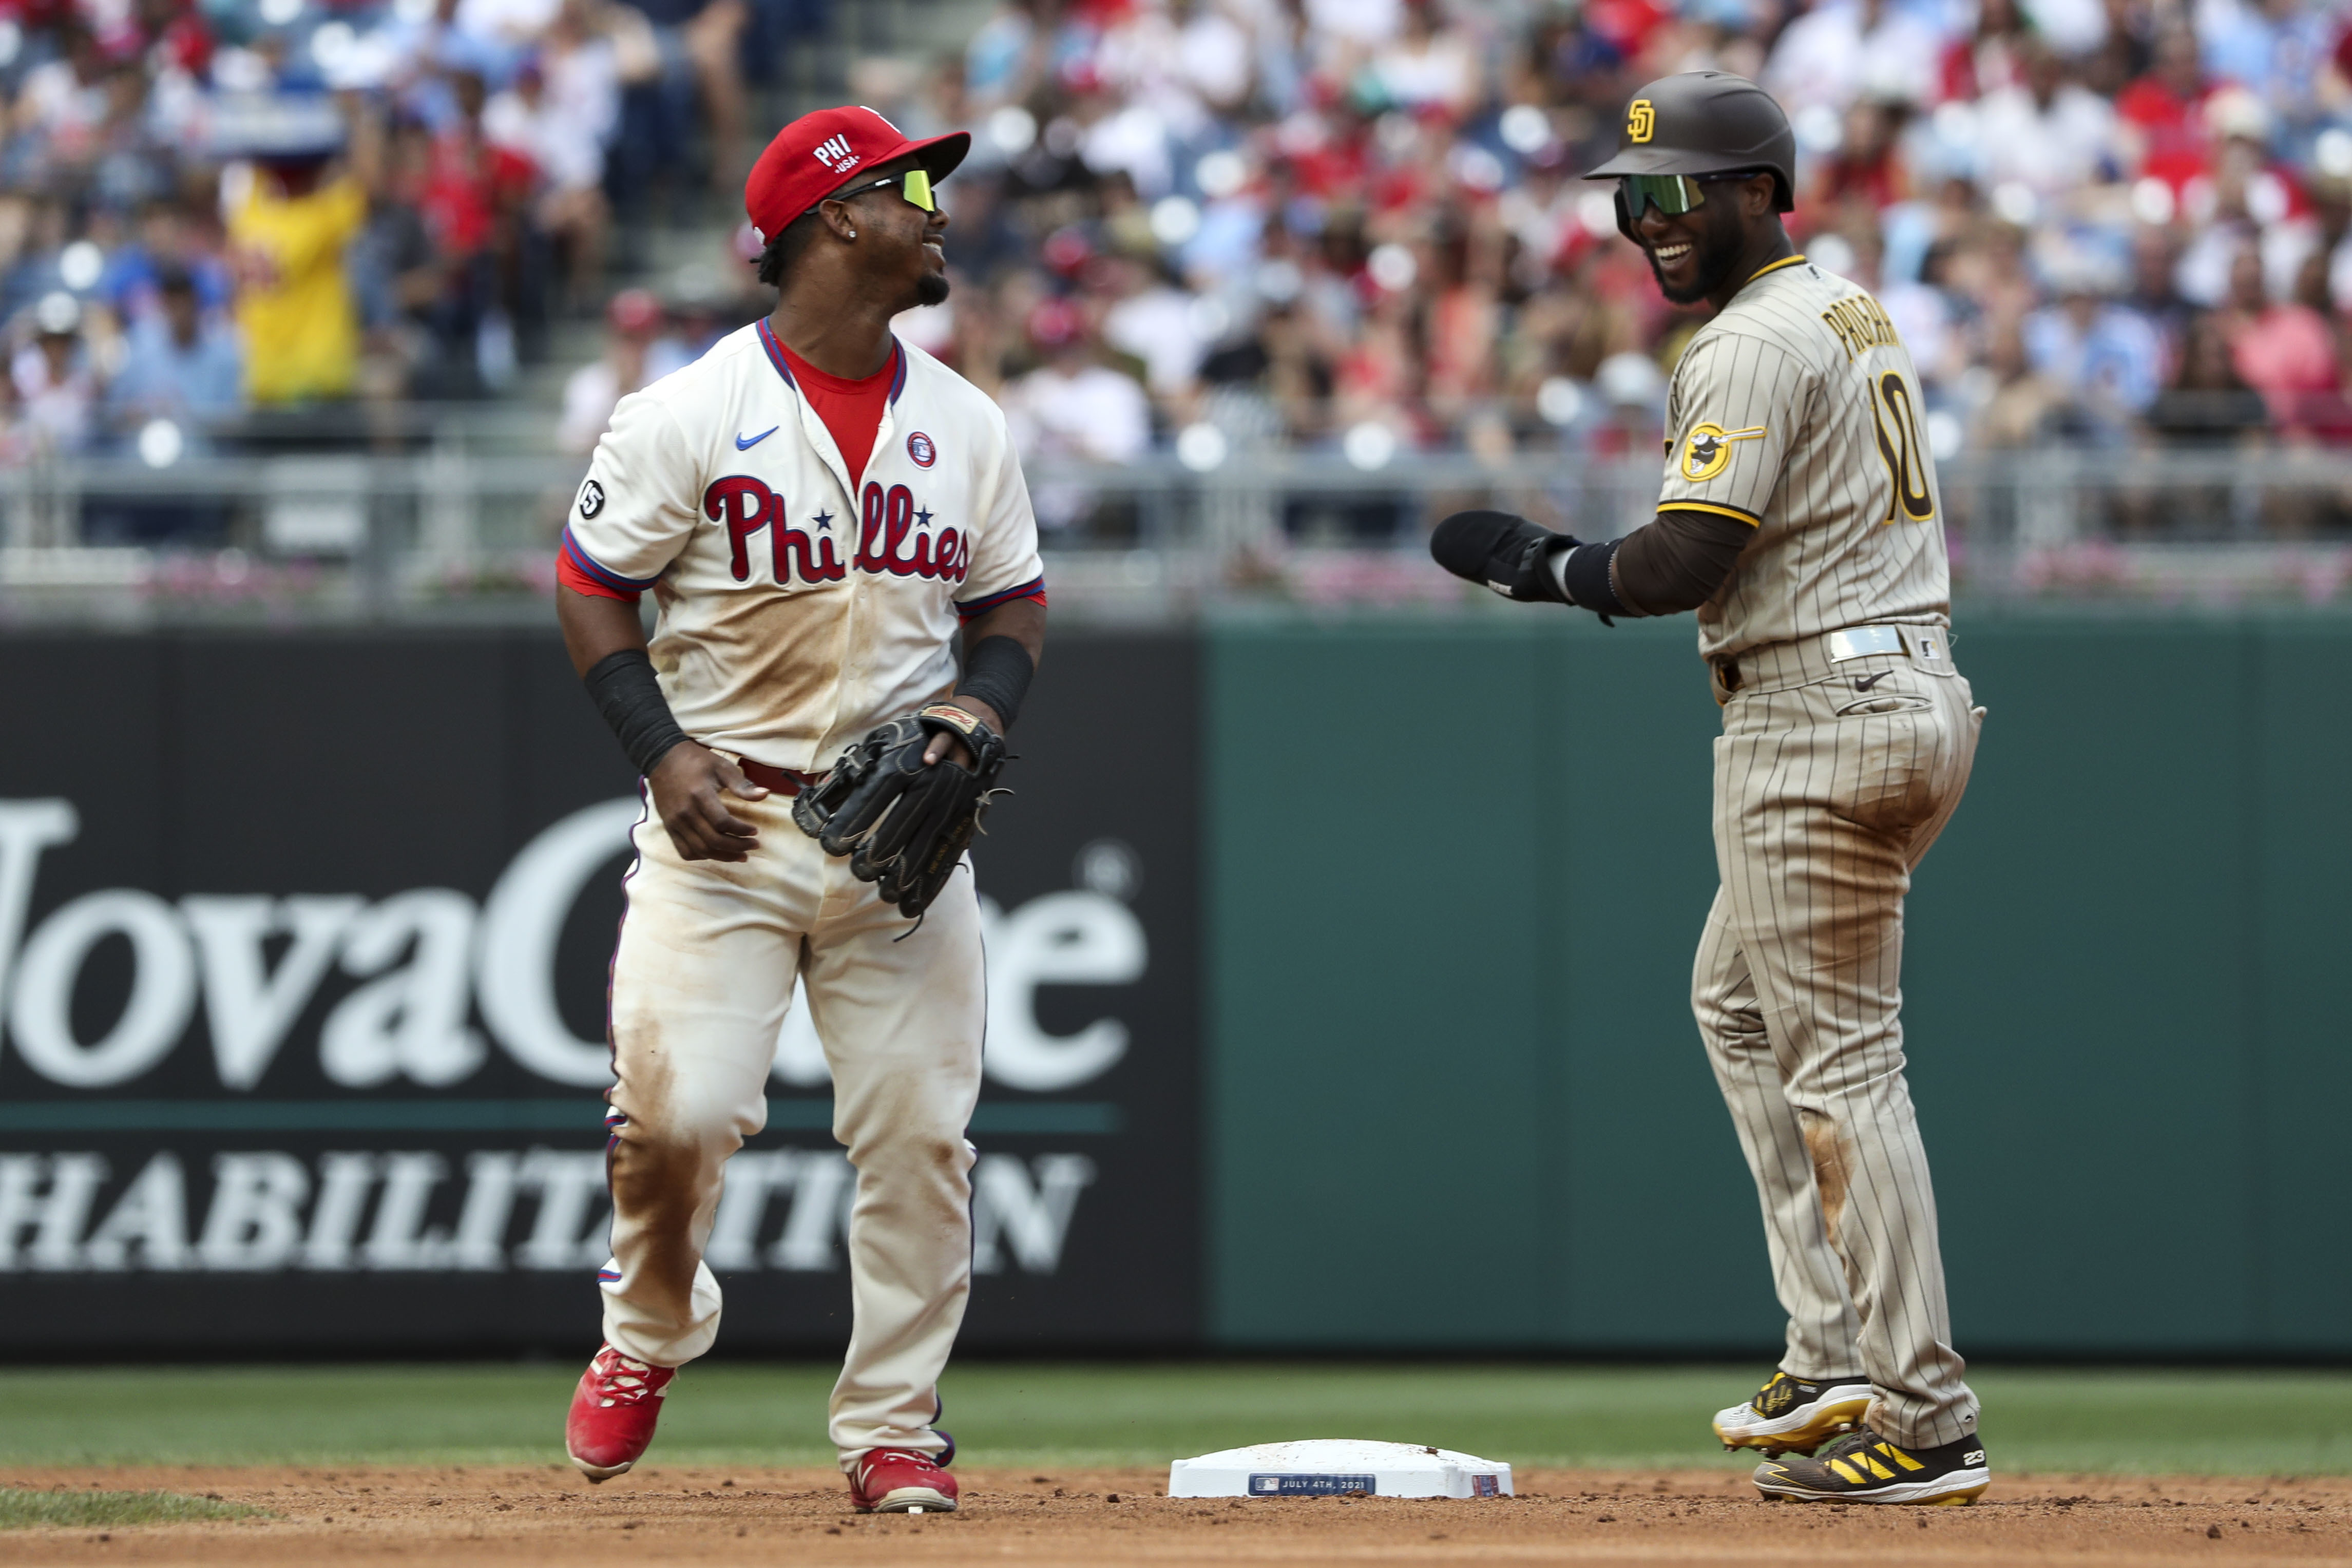 Photos from the Phillies' July 4th loss to the Padres